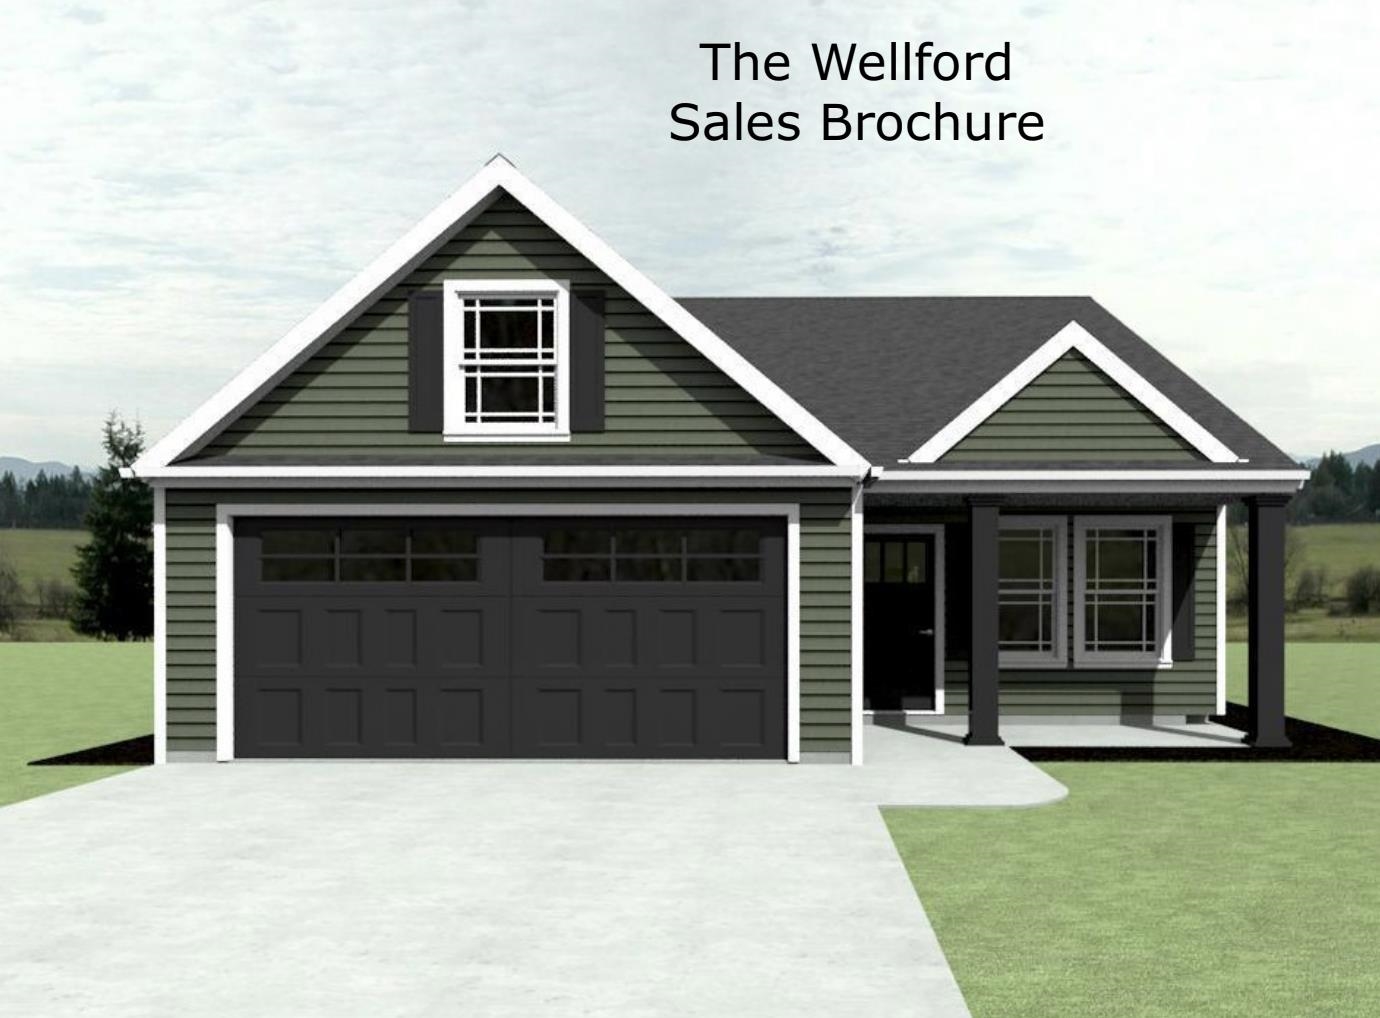 The WELLFORD plan has an open layout, spacious living area, large kitchen space. 3 bedrooms and 2 bathrooms. The master suite features a walk-in closet and tray ceiling. Other lots and plans available. Lot 6